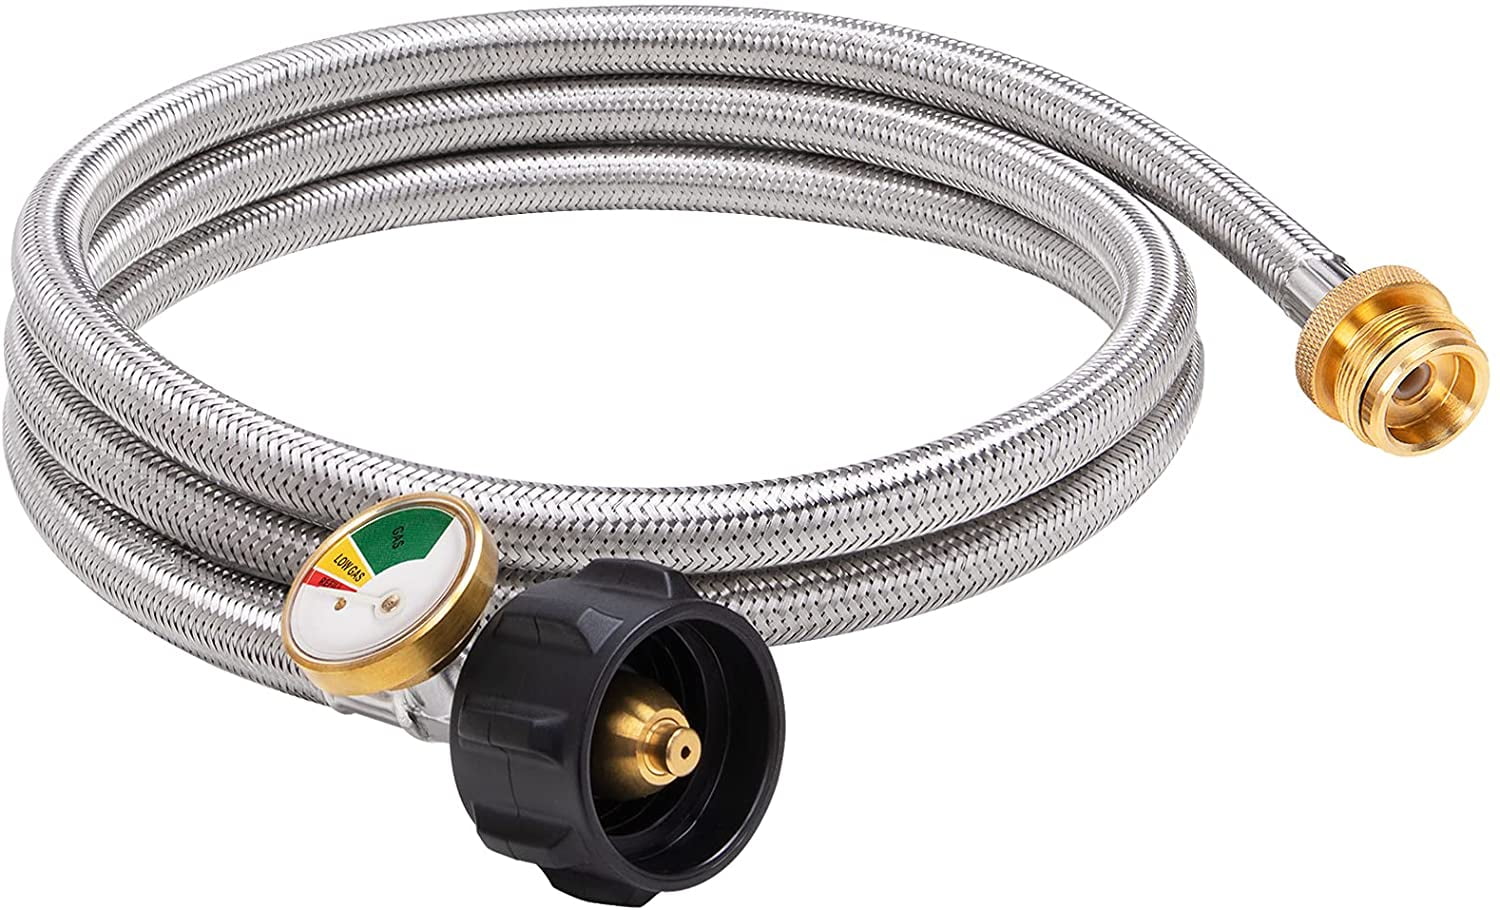 GASPRO 4ft Propane Tank Adapter Hose, Propane Adapter 1lb to 20lb, Converts 1lb Appliances to 5-40lb Tanks, Fit for Coleman Camping Stove, Buddy